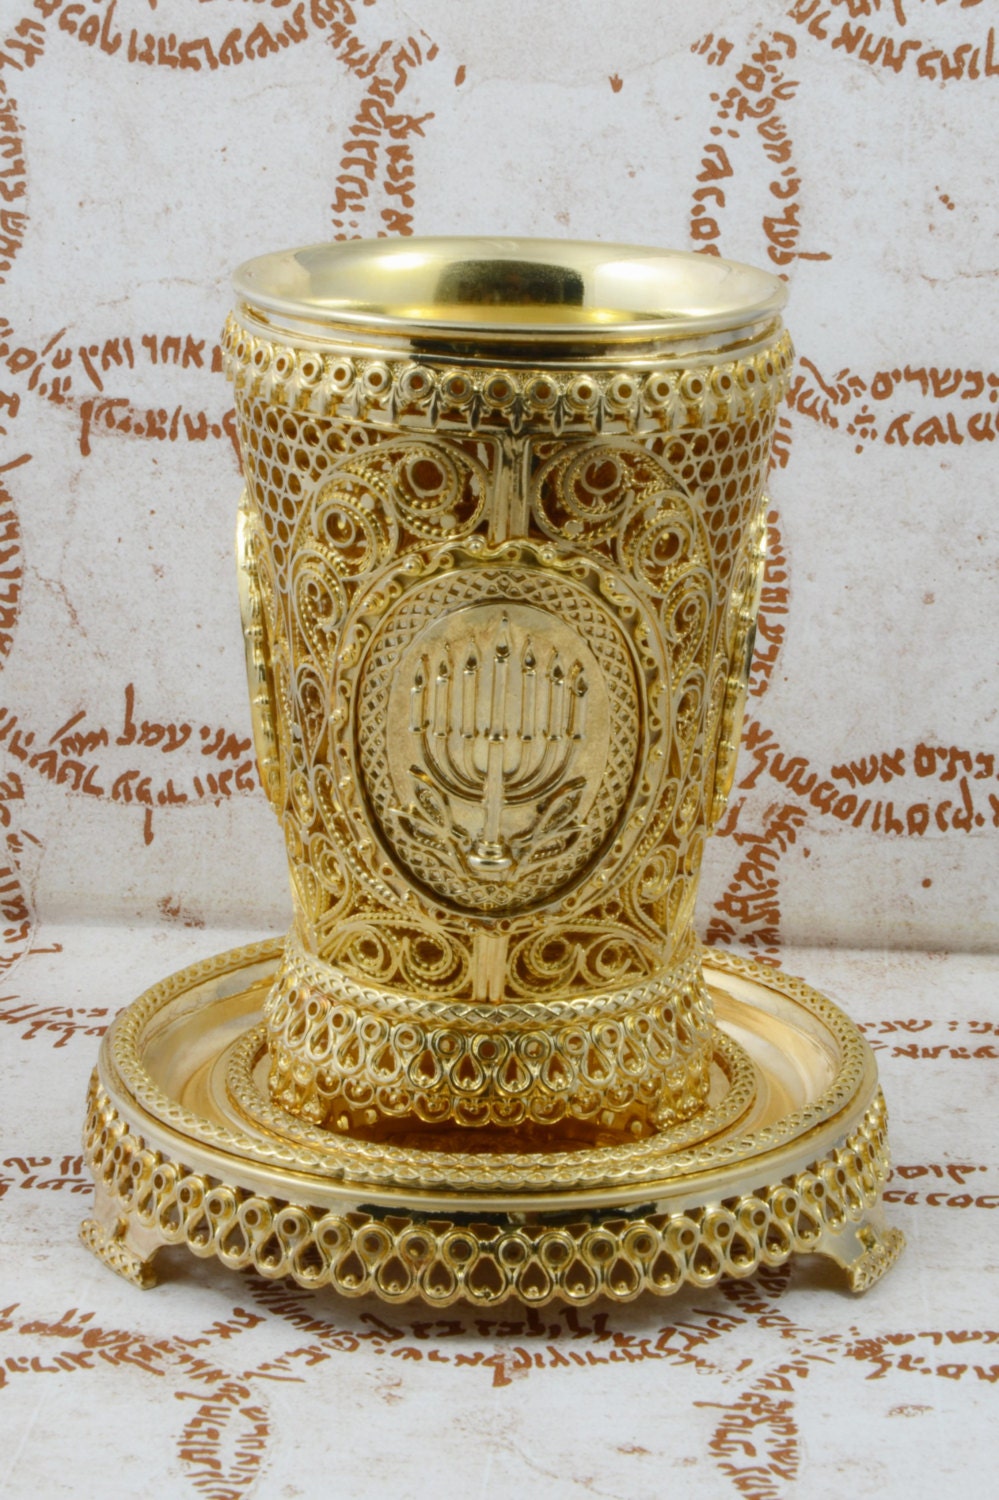 Unique handmade 24 karat gold plated Kiddush cup with tray for Shabbat